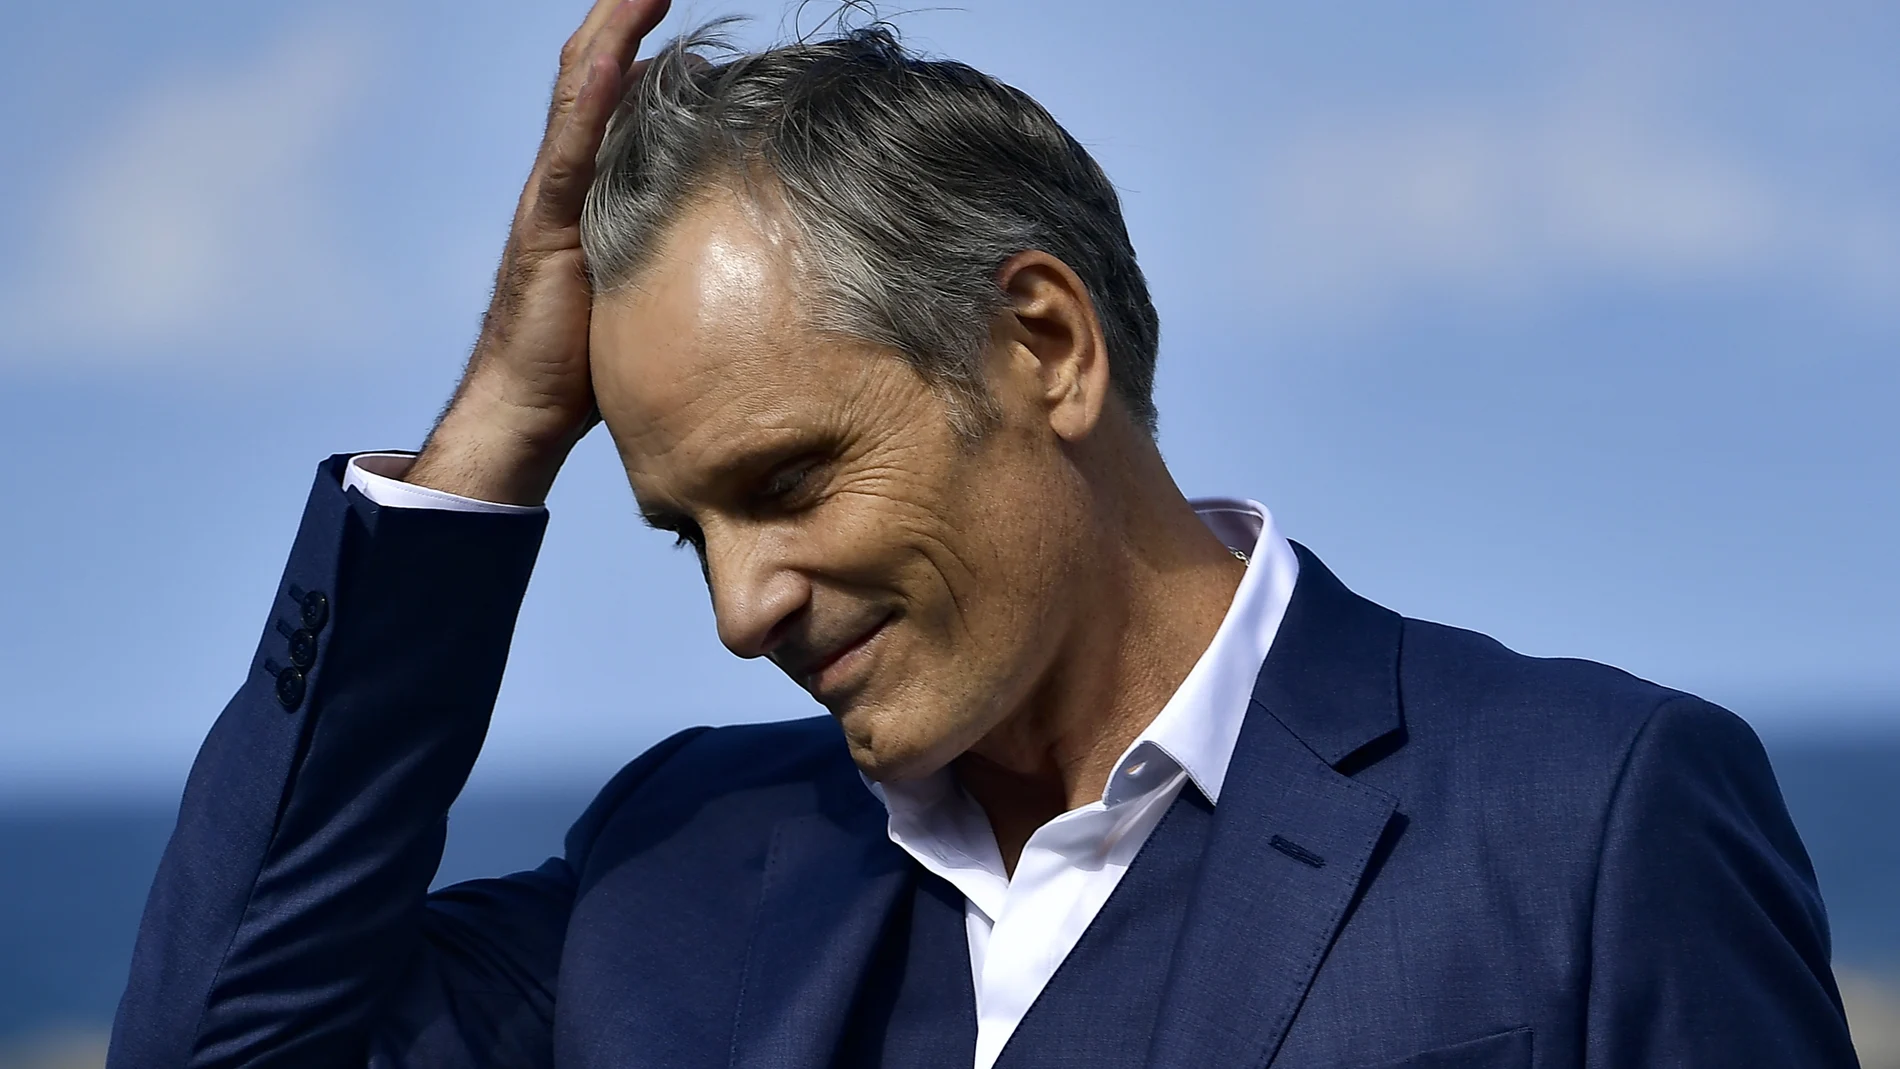 US actor and film director Viggo Mortensen, smiles during the photocall to promotes his film "Falling" and before receiving the Donostia Award during the 68th San Sebastian Film Festival, in San Sebastian.